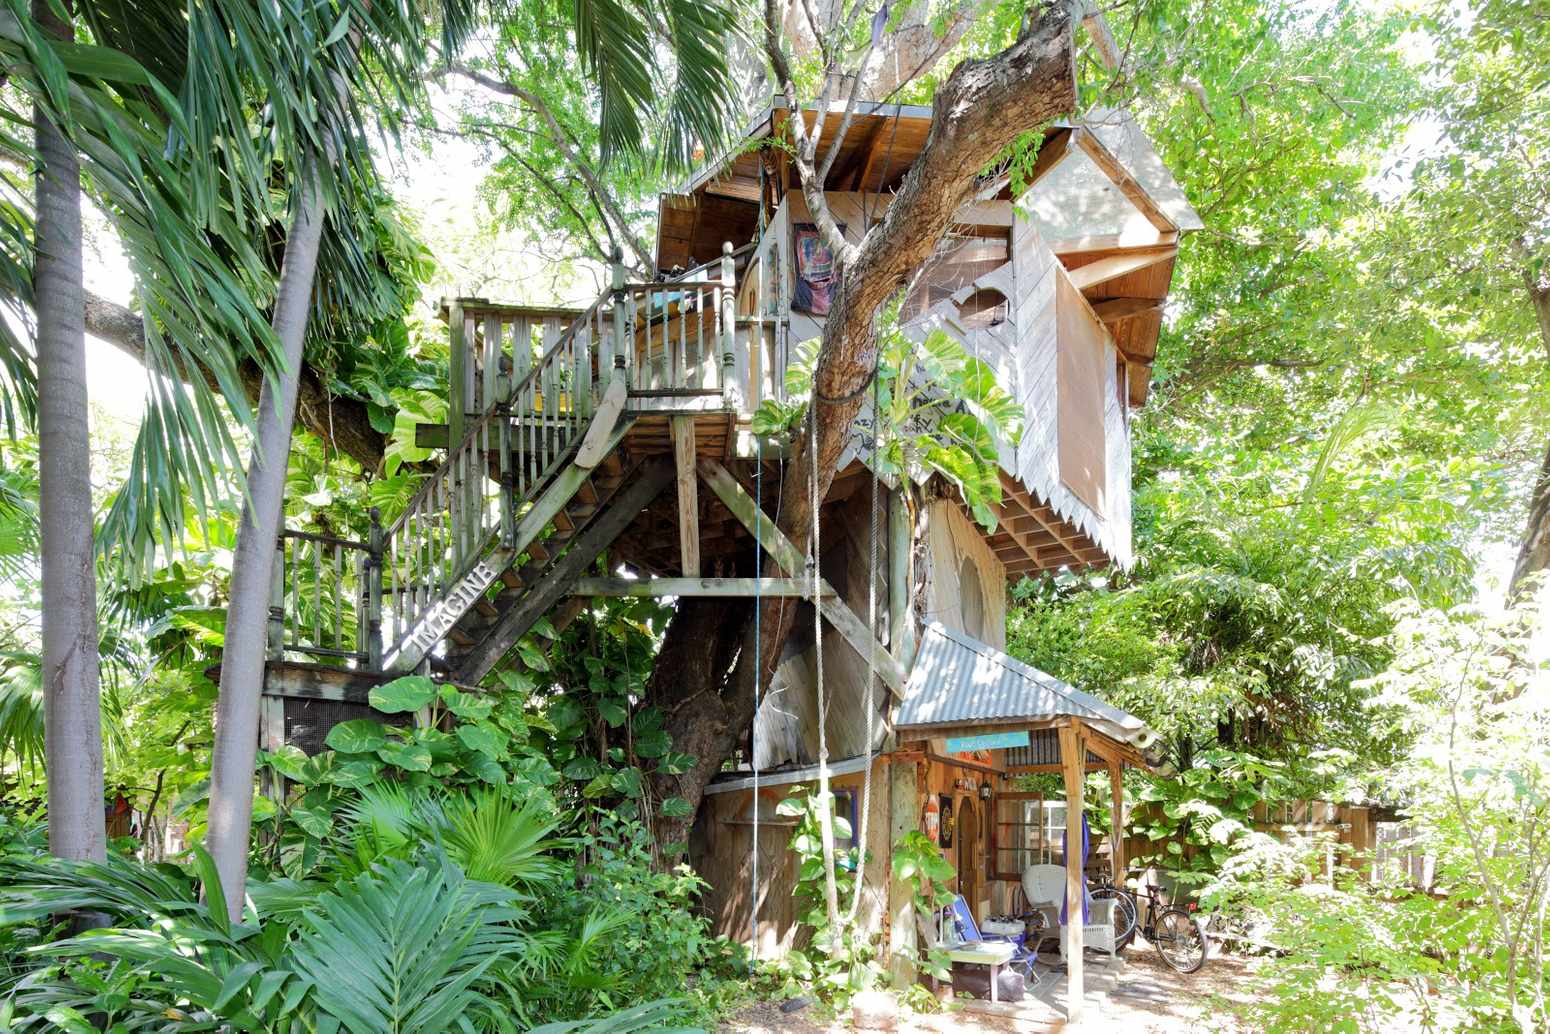 Tree House in Florida Top 25 Strangest Houses around the World - 15